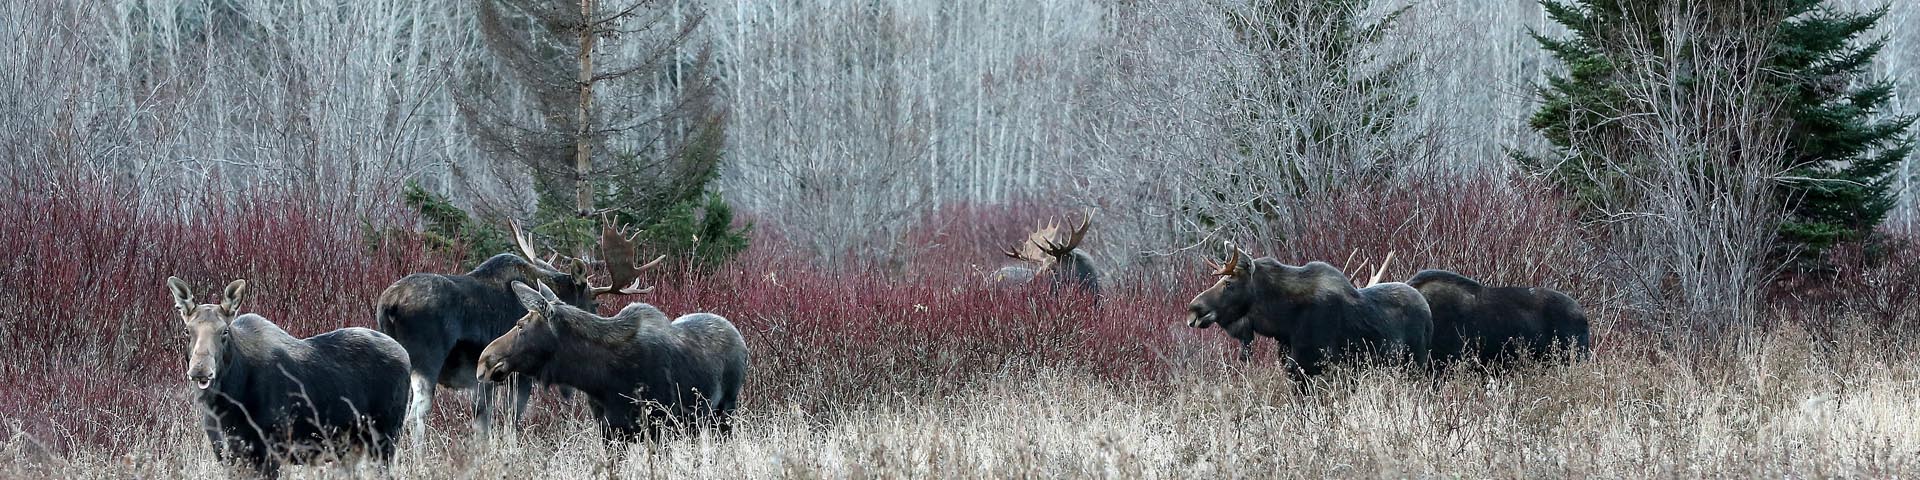 The photo shows 6 moose divided into 2 groups of 3. The animals are in a dogwood field at the foot of mountains covered with mixed forests. This is an autumn scene, taken in the L'Anse-au-Griffon area, during the period when moose come to feed intensively before winter.